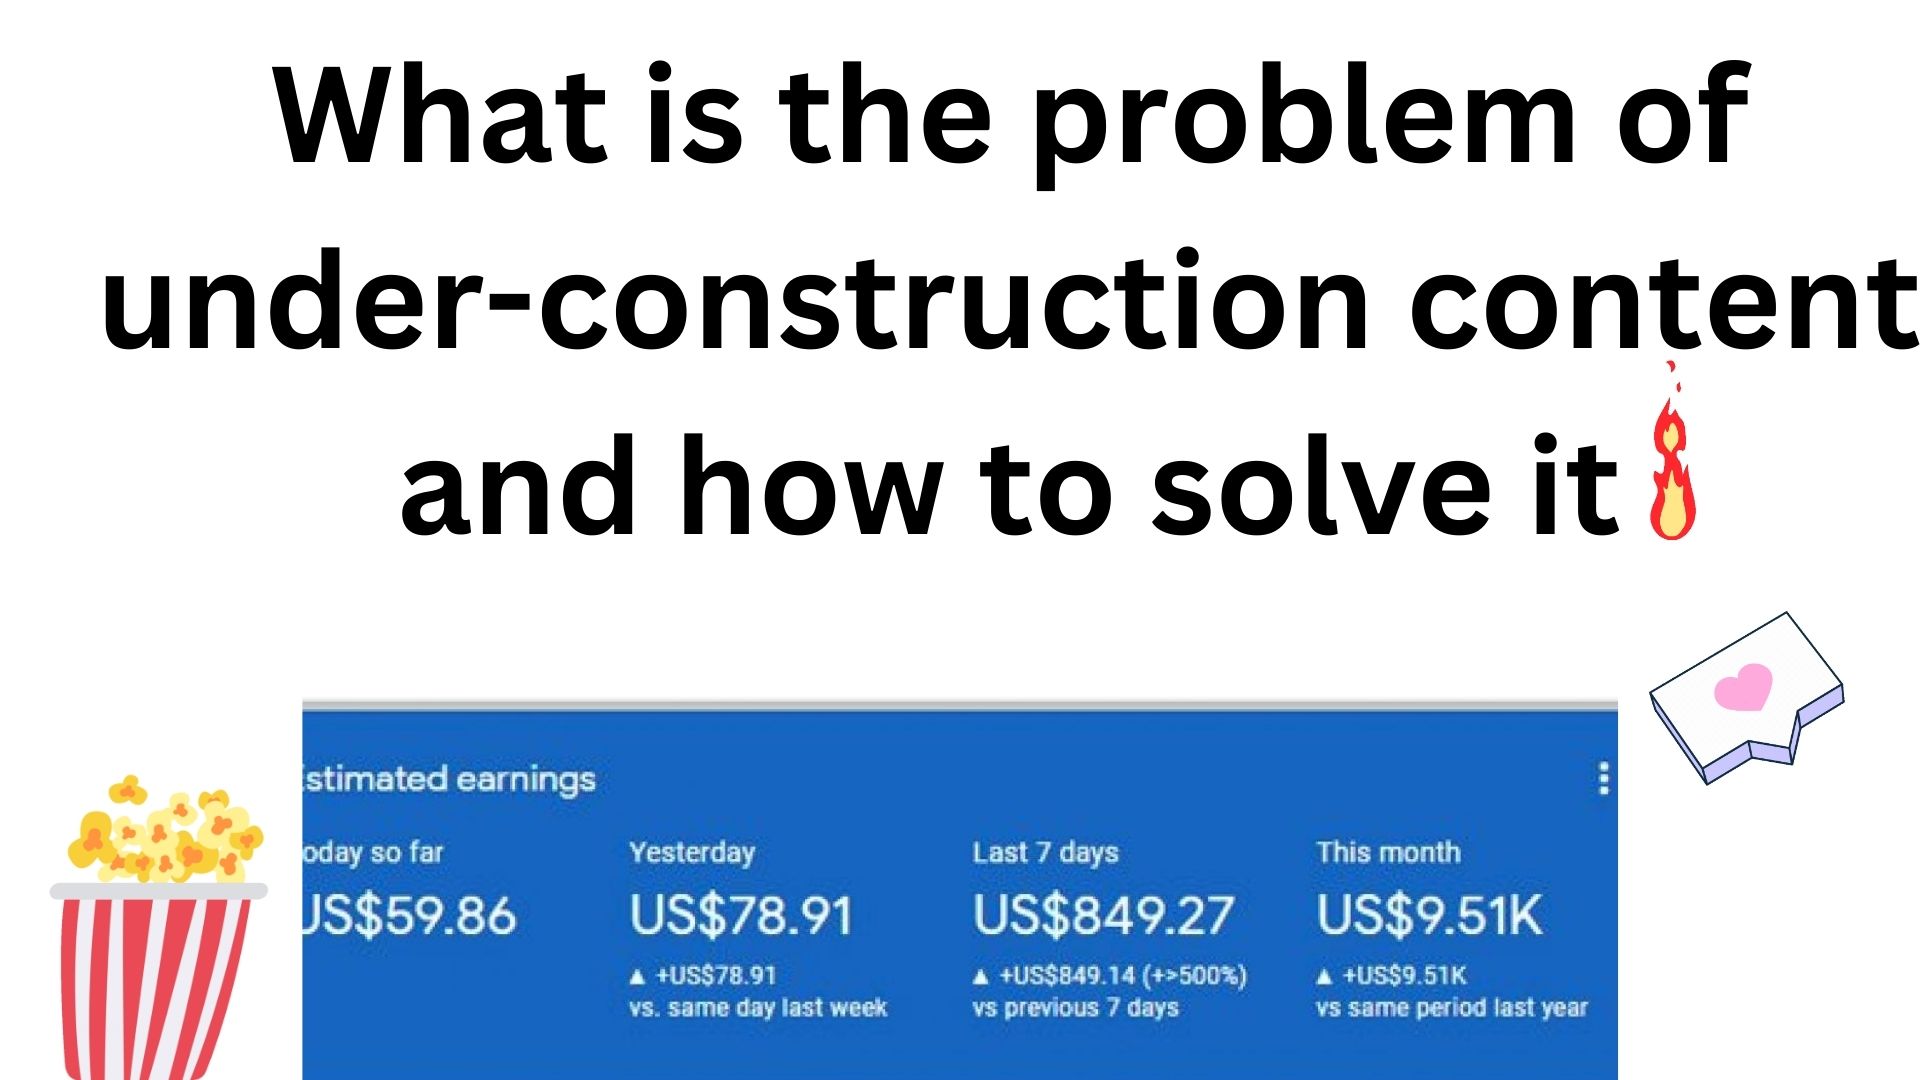 What Is The Problem Of Under-Construction Content And How To Solve It